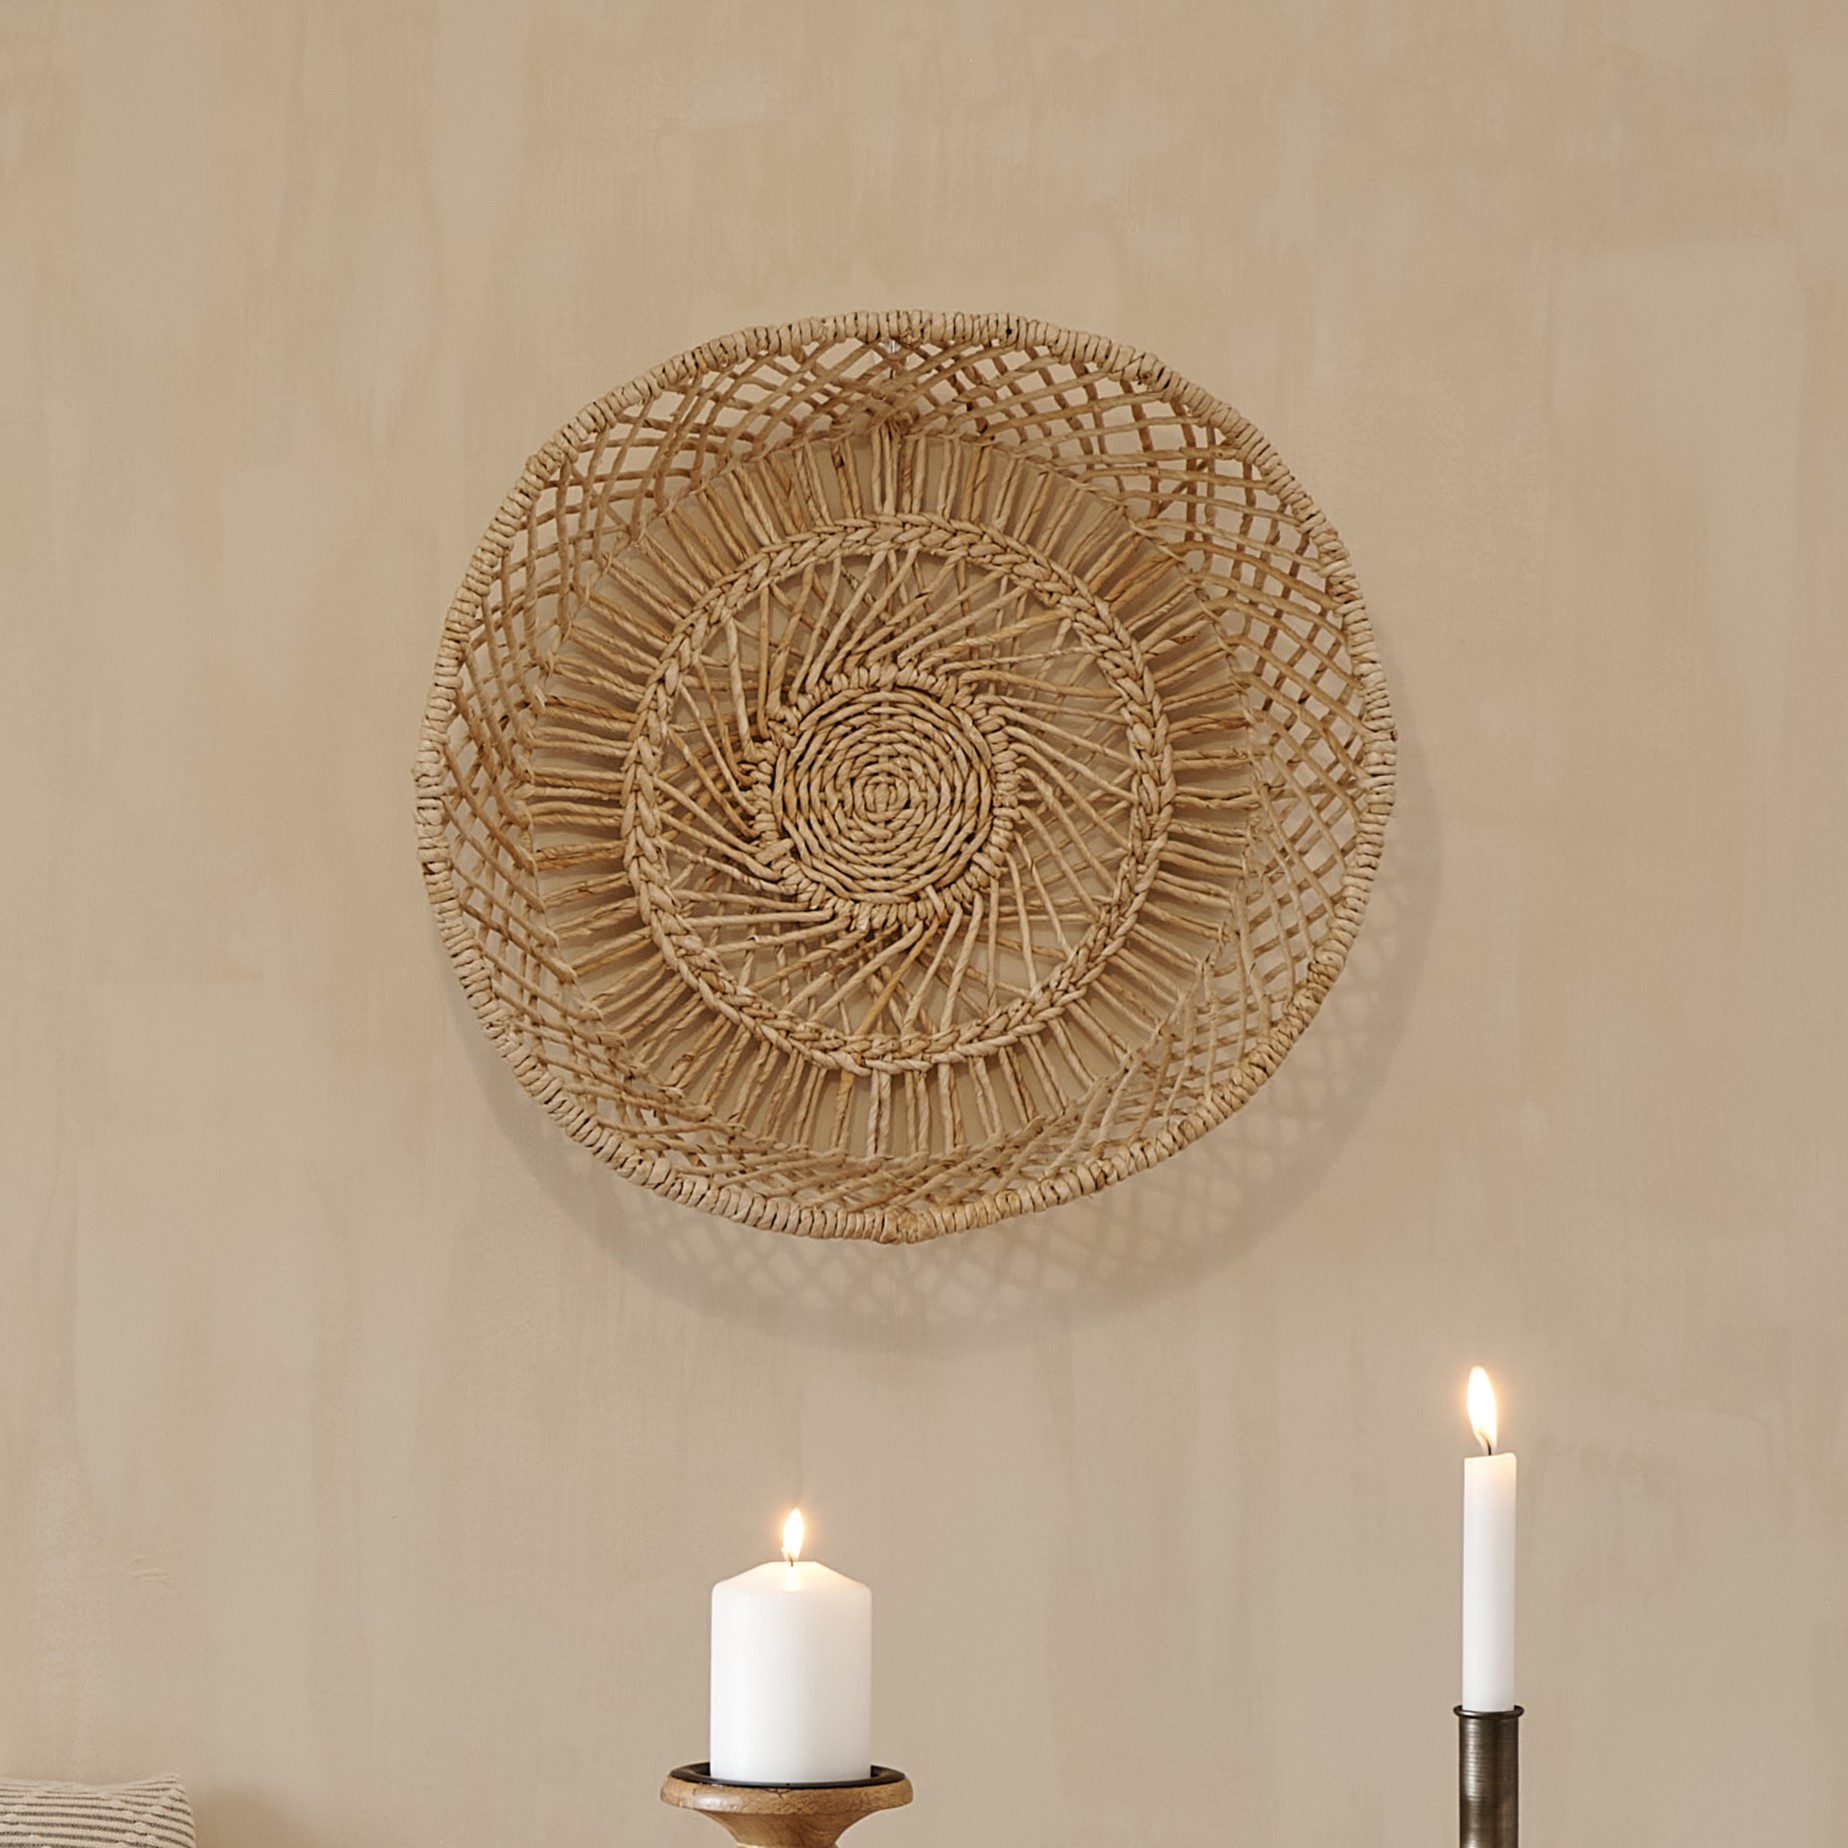 Wicker Wall Basket on wall with white candles underneath